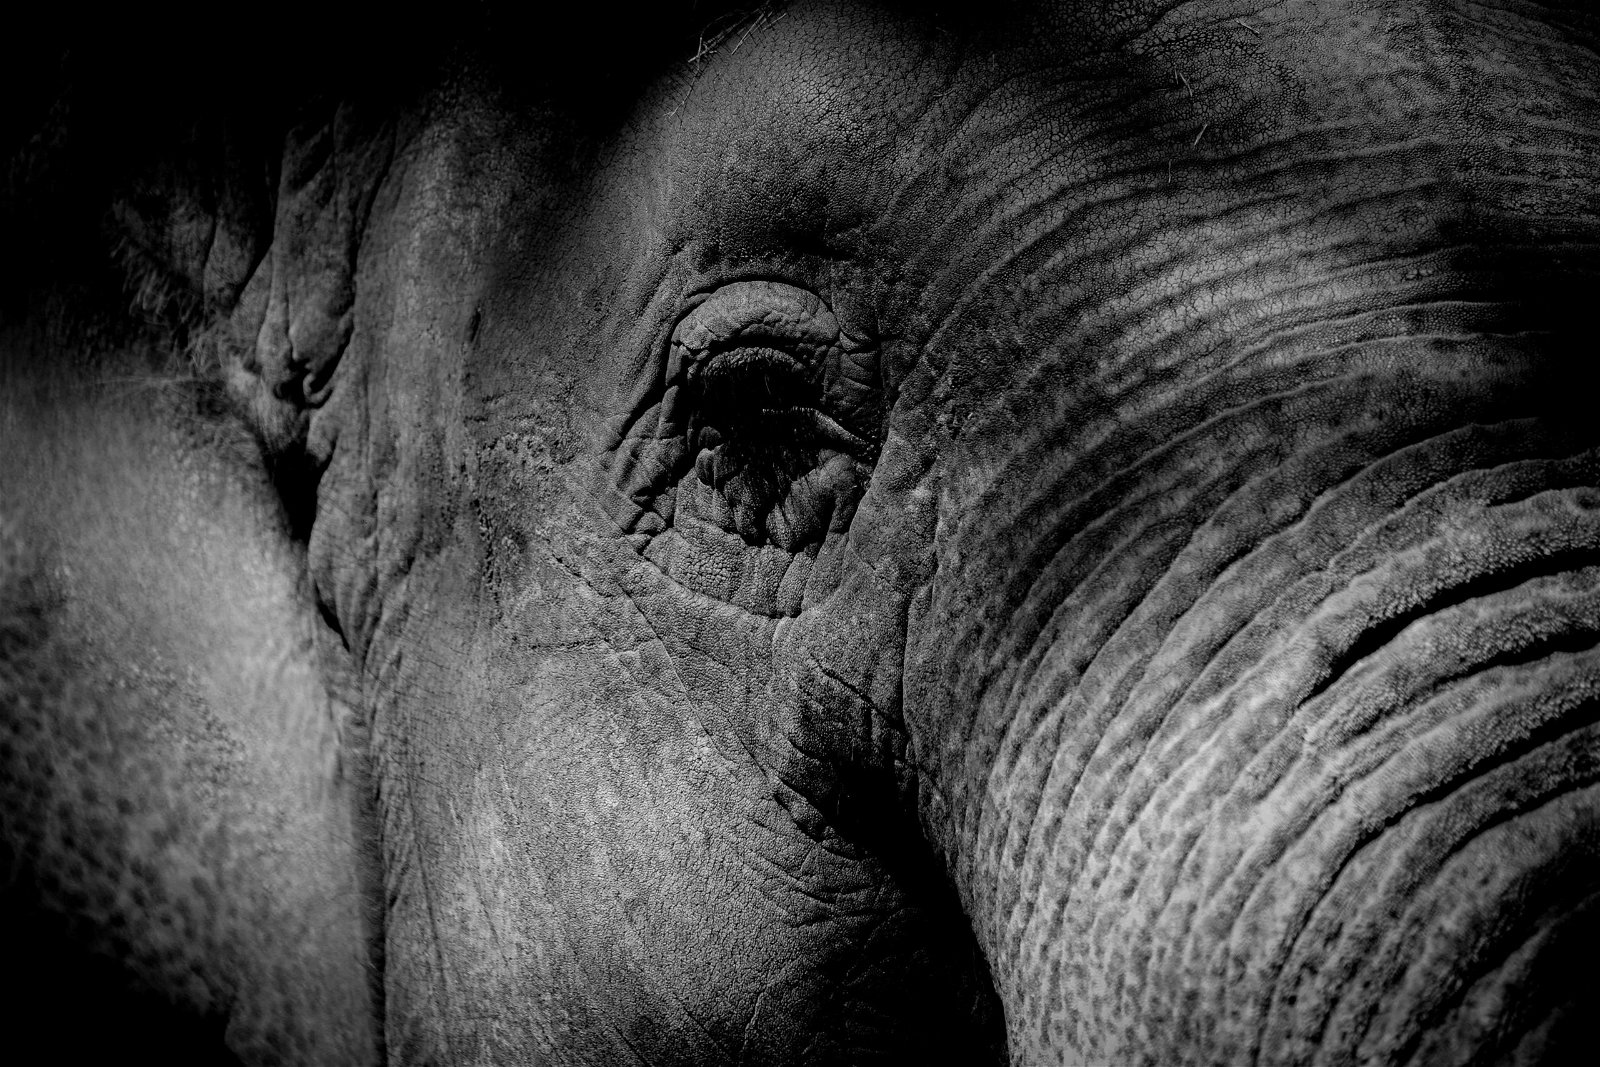 Another travel photography tip is don't forget the details like this elephant's eye